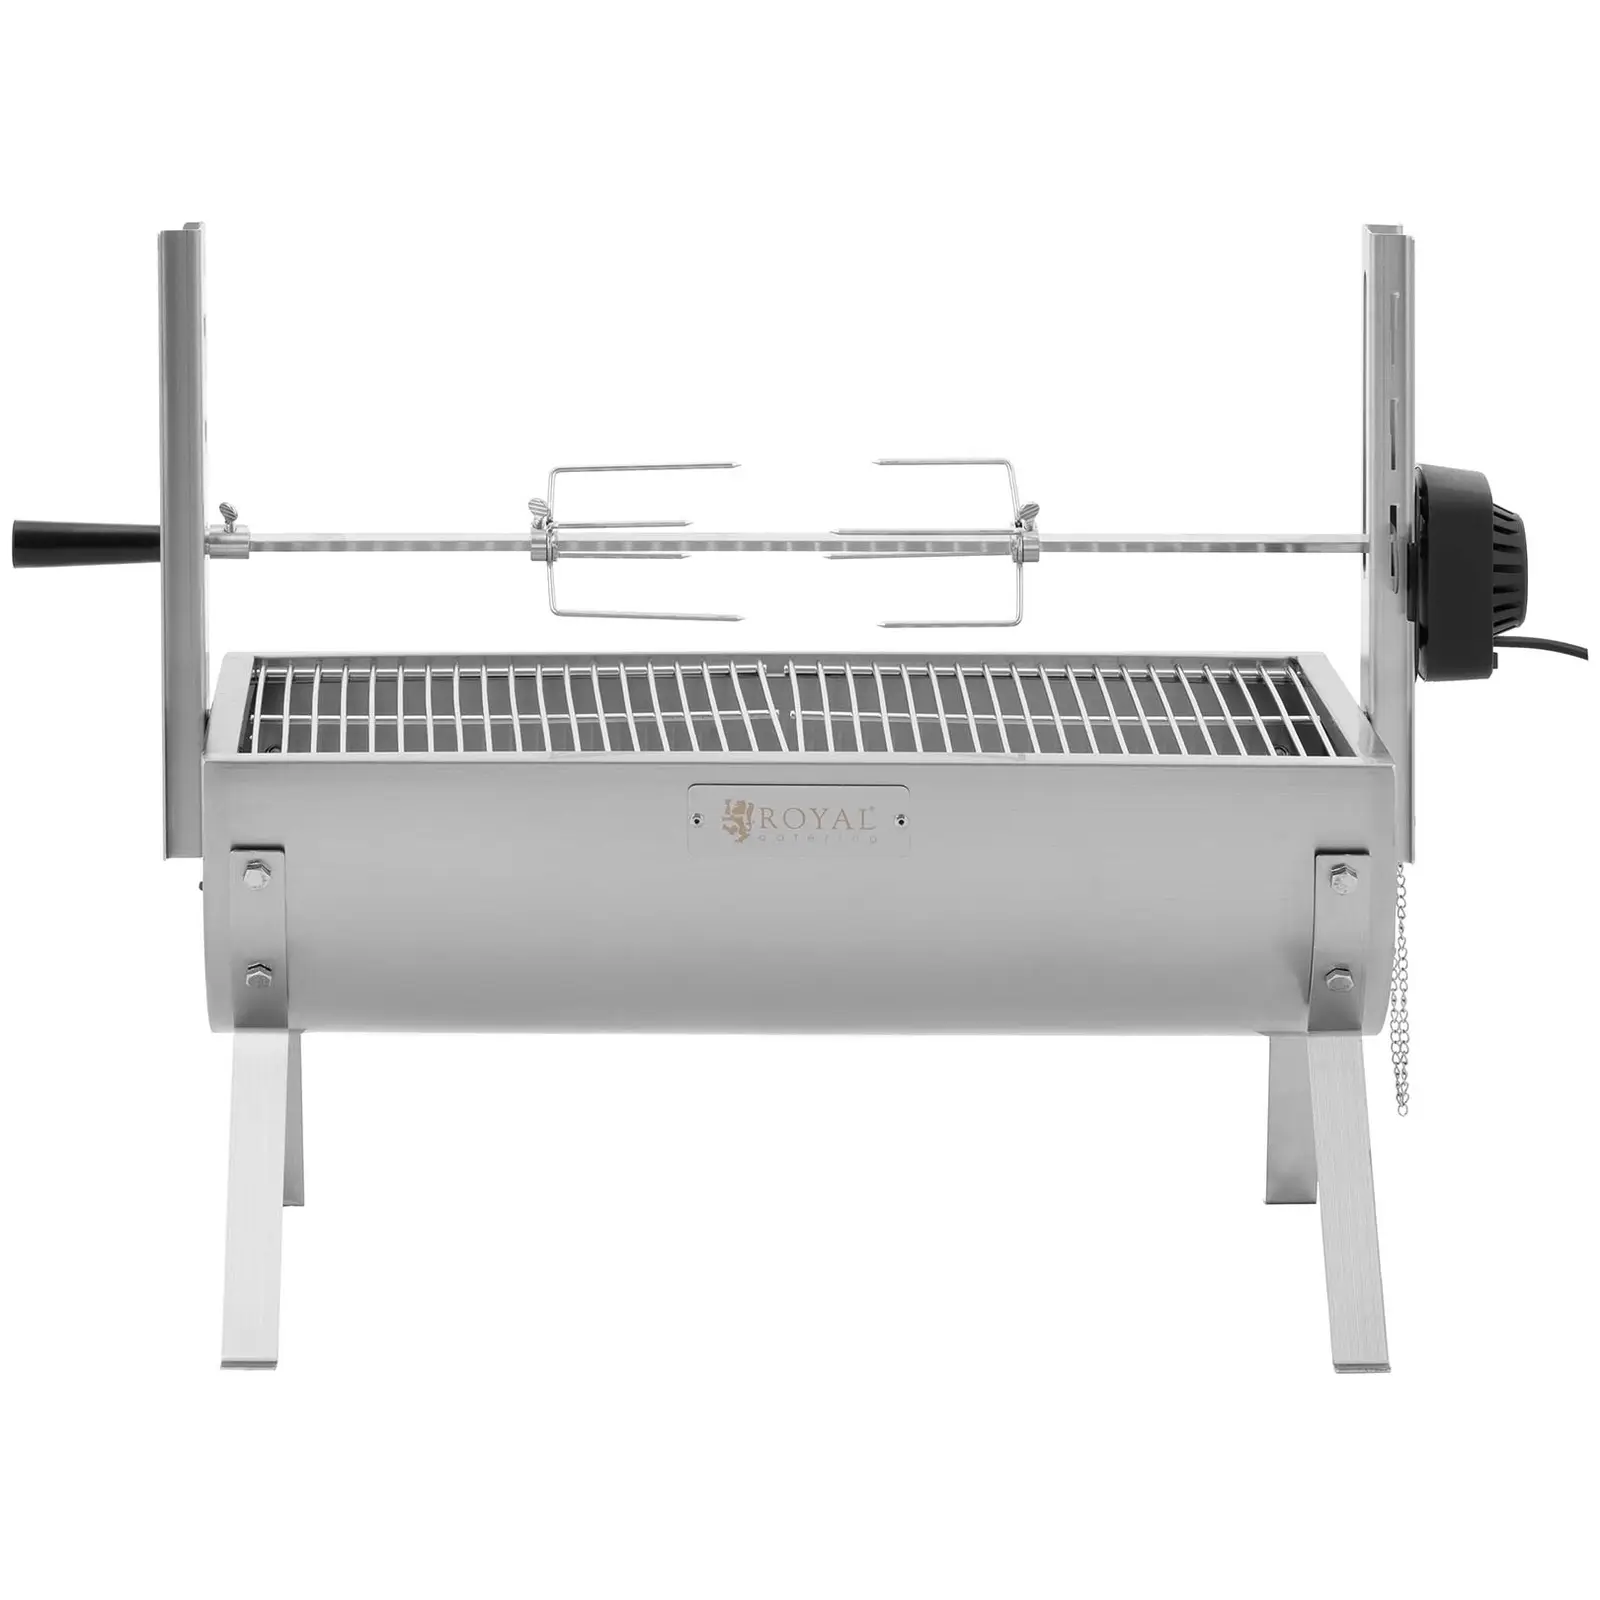 Roasting Spit - with motor - 15 kg - stainless steel - grill spit length: 82 cm